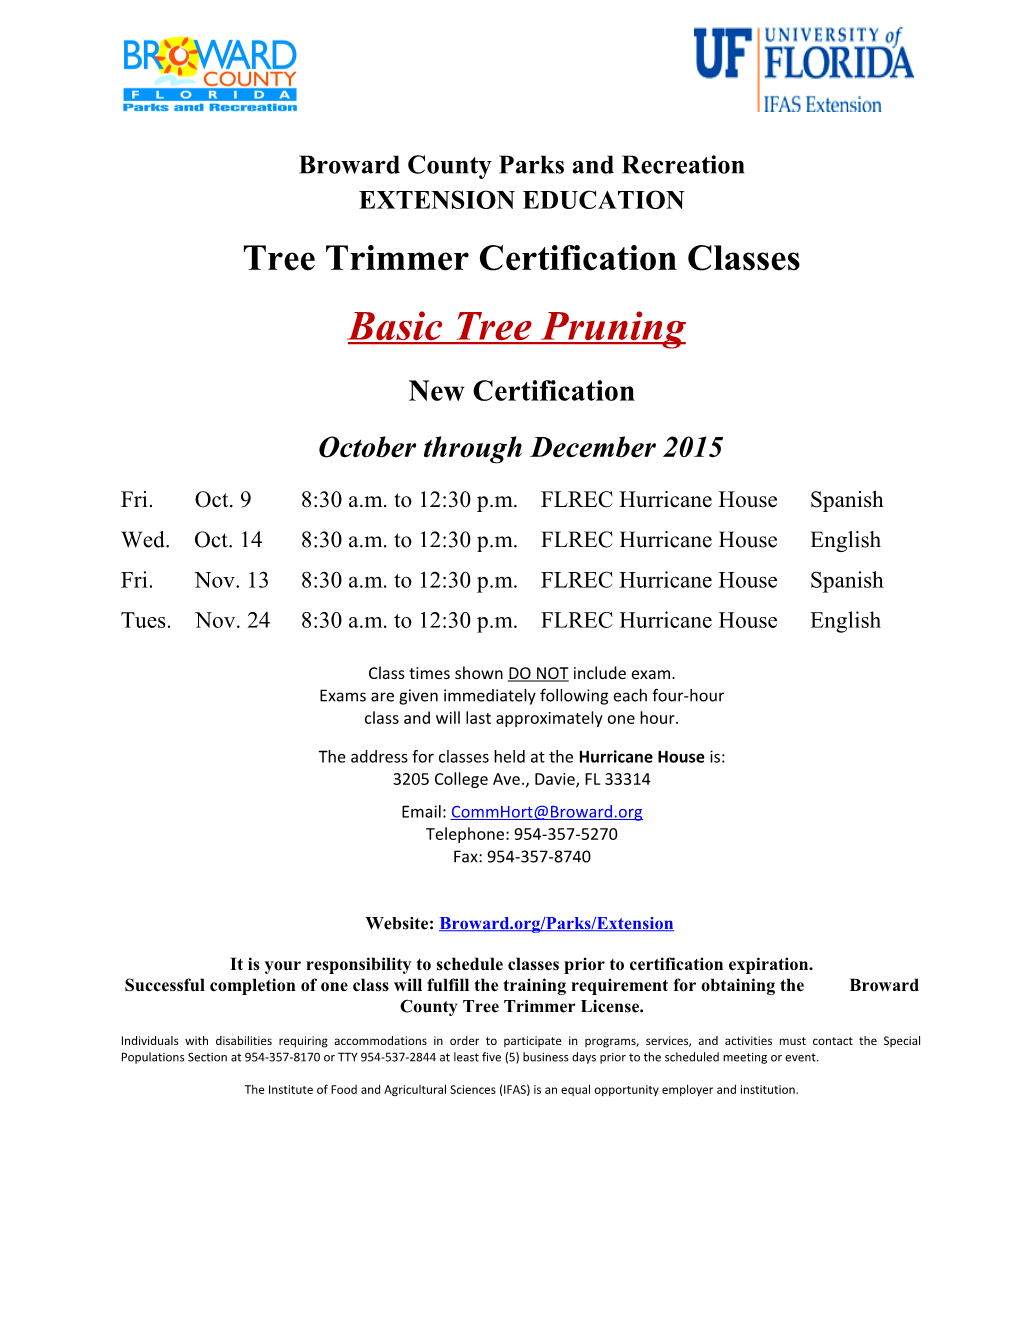 Tree Trimmers Certification Classes